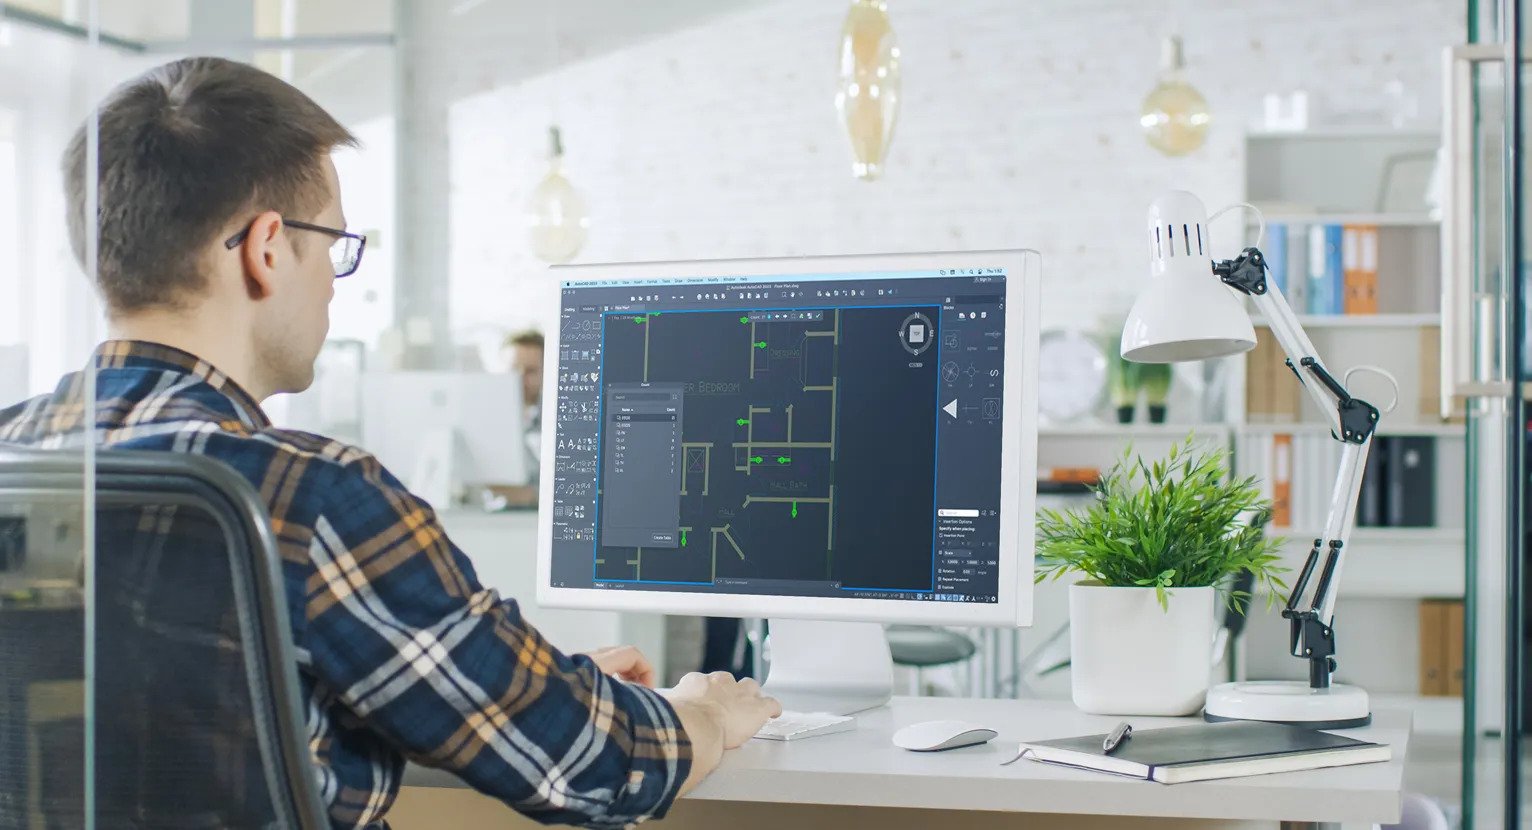 AutoCAD 2023: Free Download of the Full Version | All3DP Pro